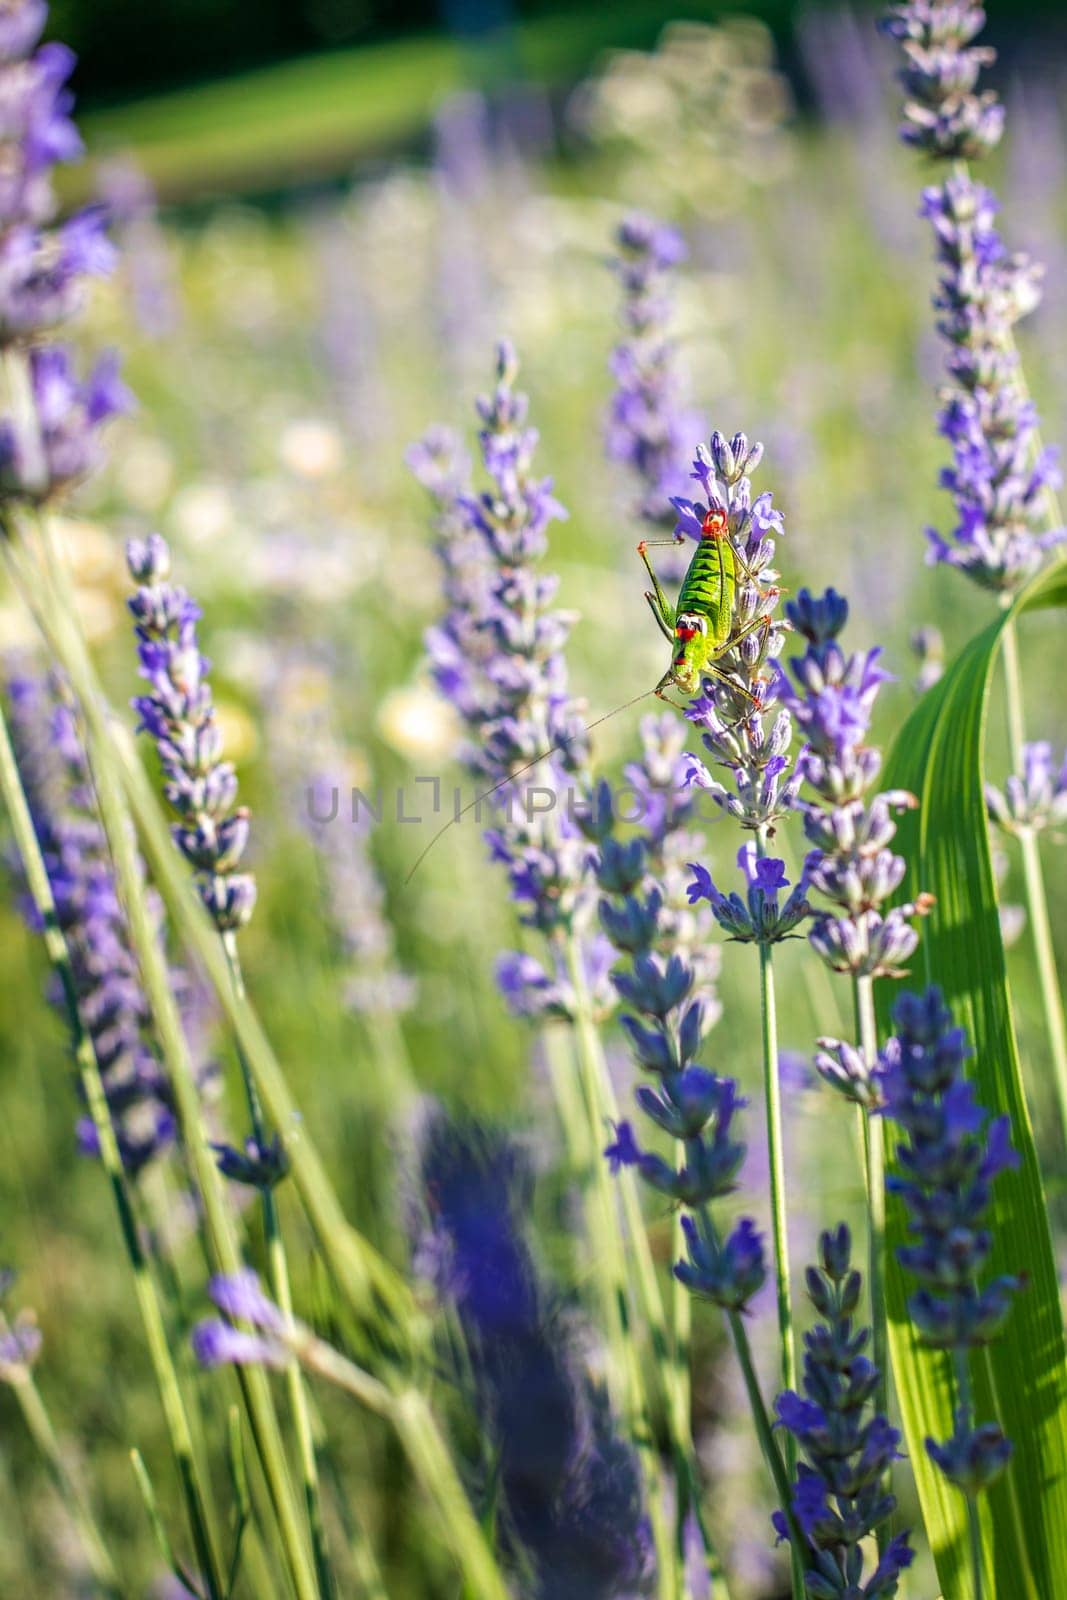 A colorful grasshopper sits on a lavender flower.